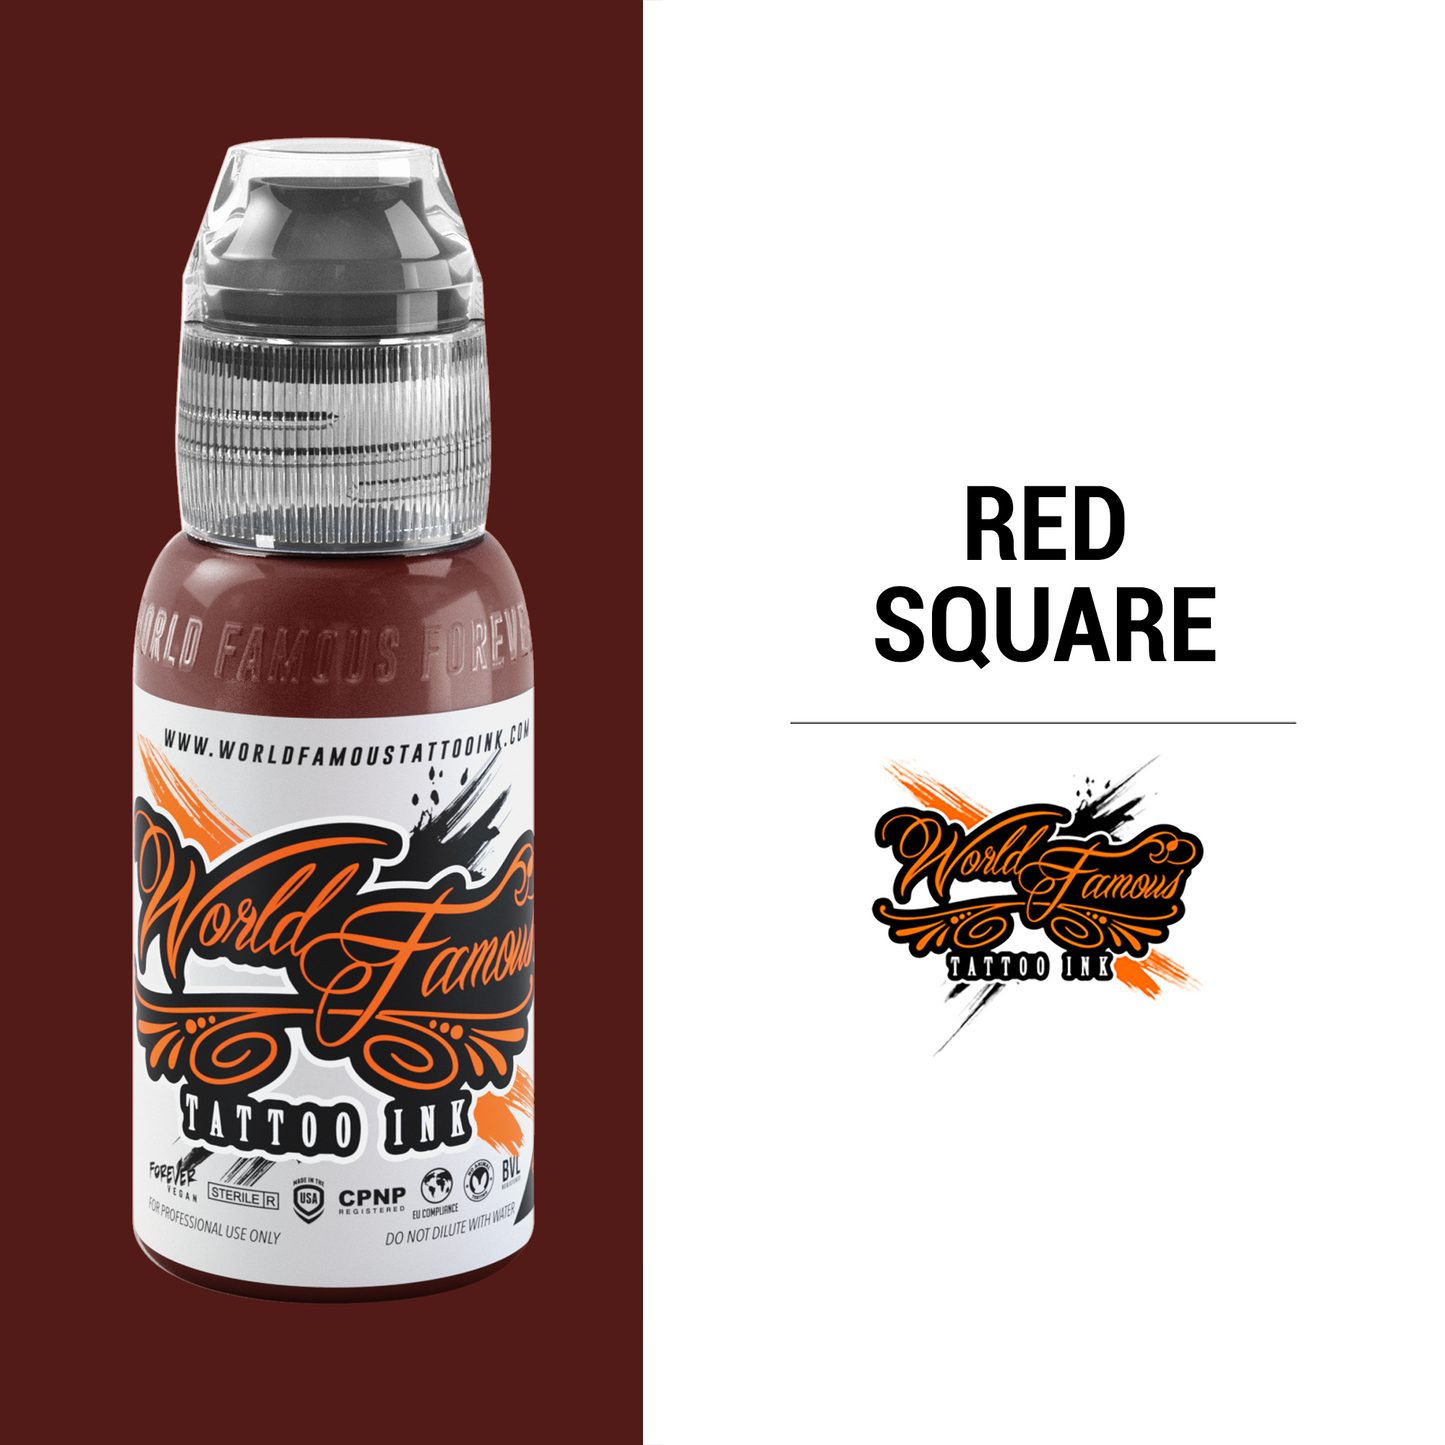 Red Square | World Famous Tattoo Ink